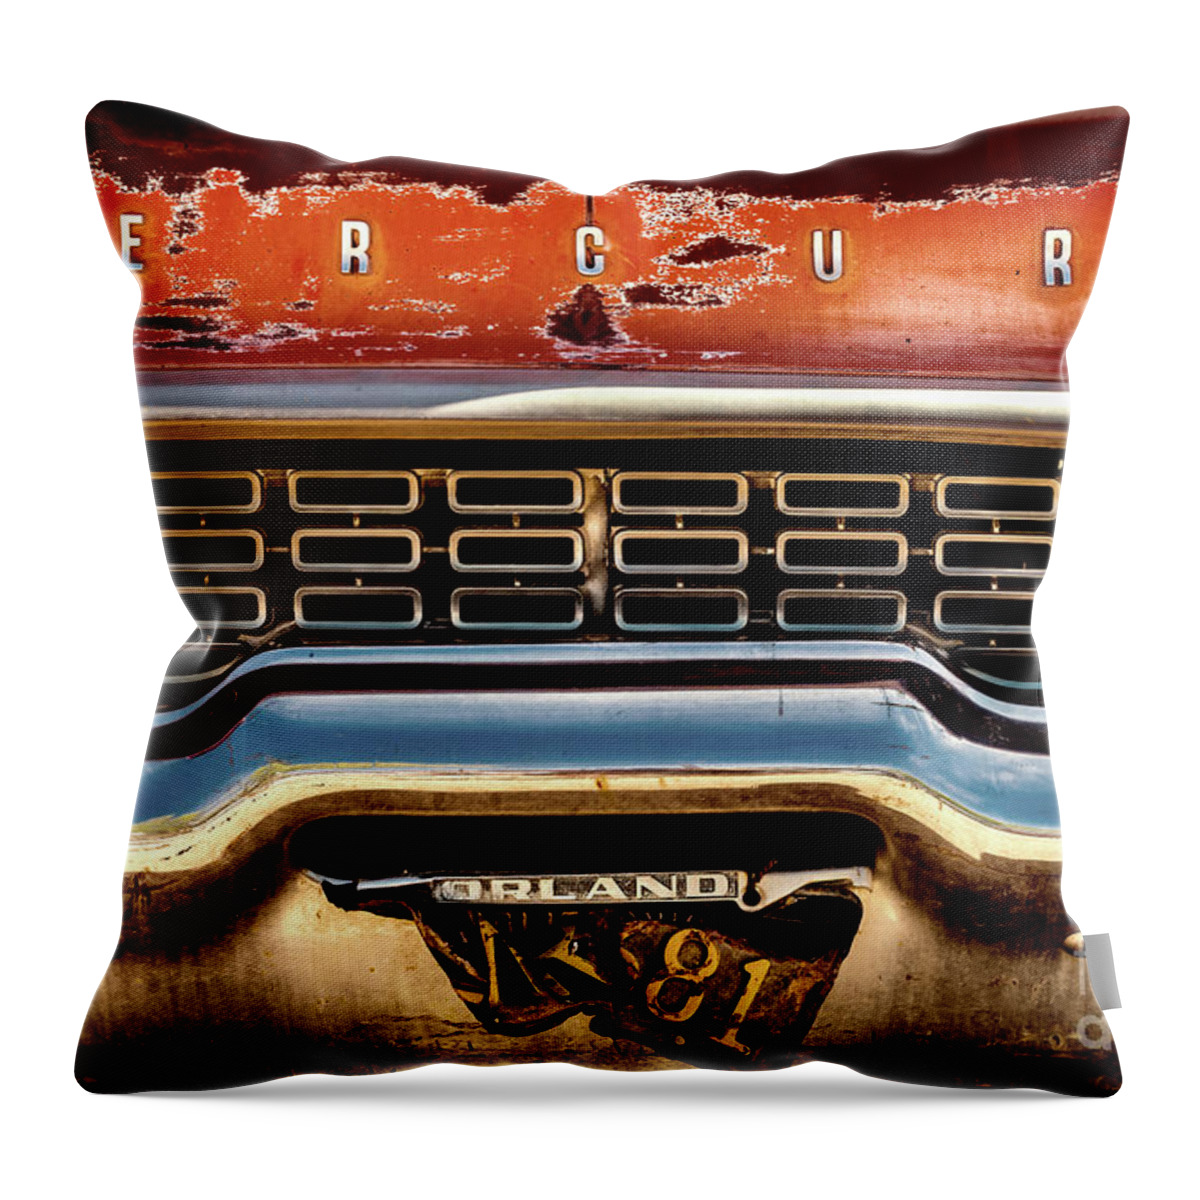 Rusty Throw Pillow featuring the photograph Rusty Mercury Car Grill by M G Whittingham